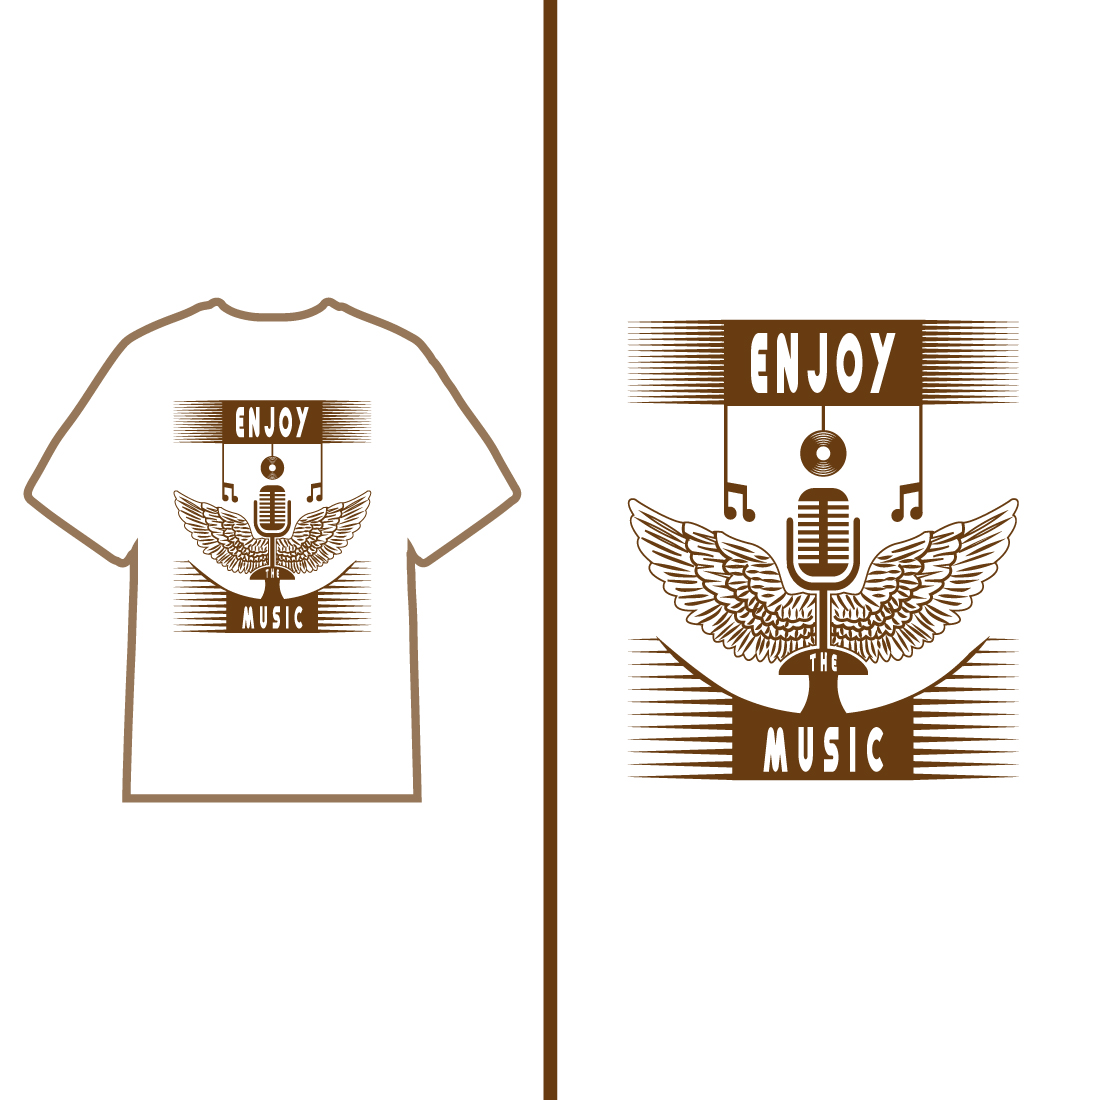 02 Music T-shirt designs preview image.